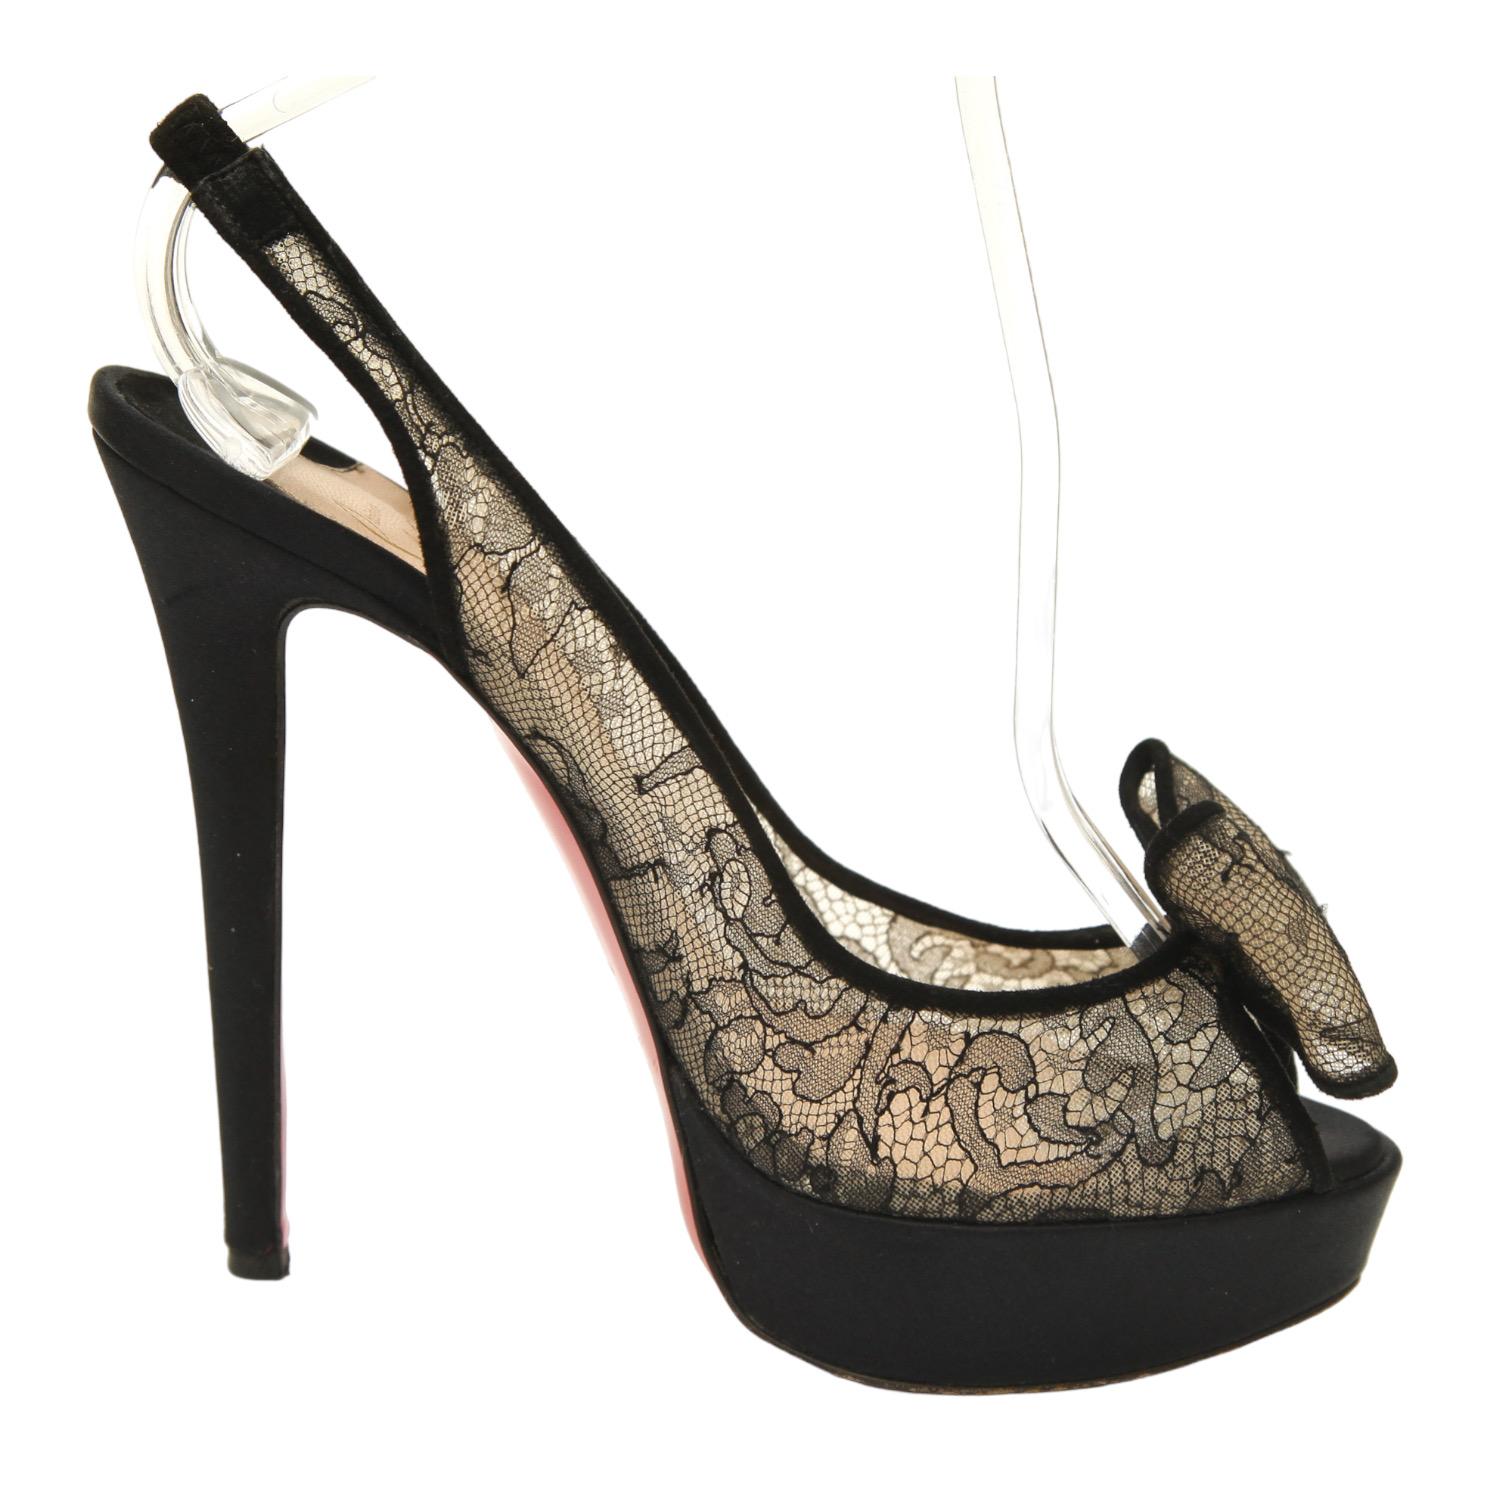 Christian Louboutin Black Satin Lace EXCLU 140 Platform Slingback Pumps

Details:
- Black satin/lace uppers.
- Peep toe.
- Bow at vamp.
- Slingback.
- Platform.
- Comes with dust bag.

Size: 38

Measurements (Approx):
- Insole 9.75